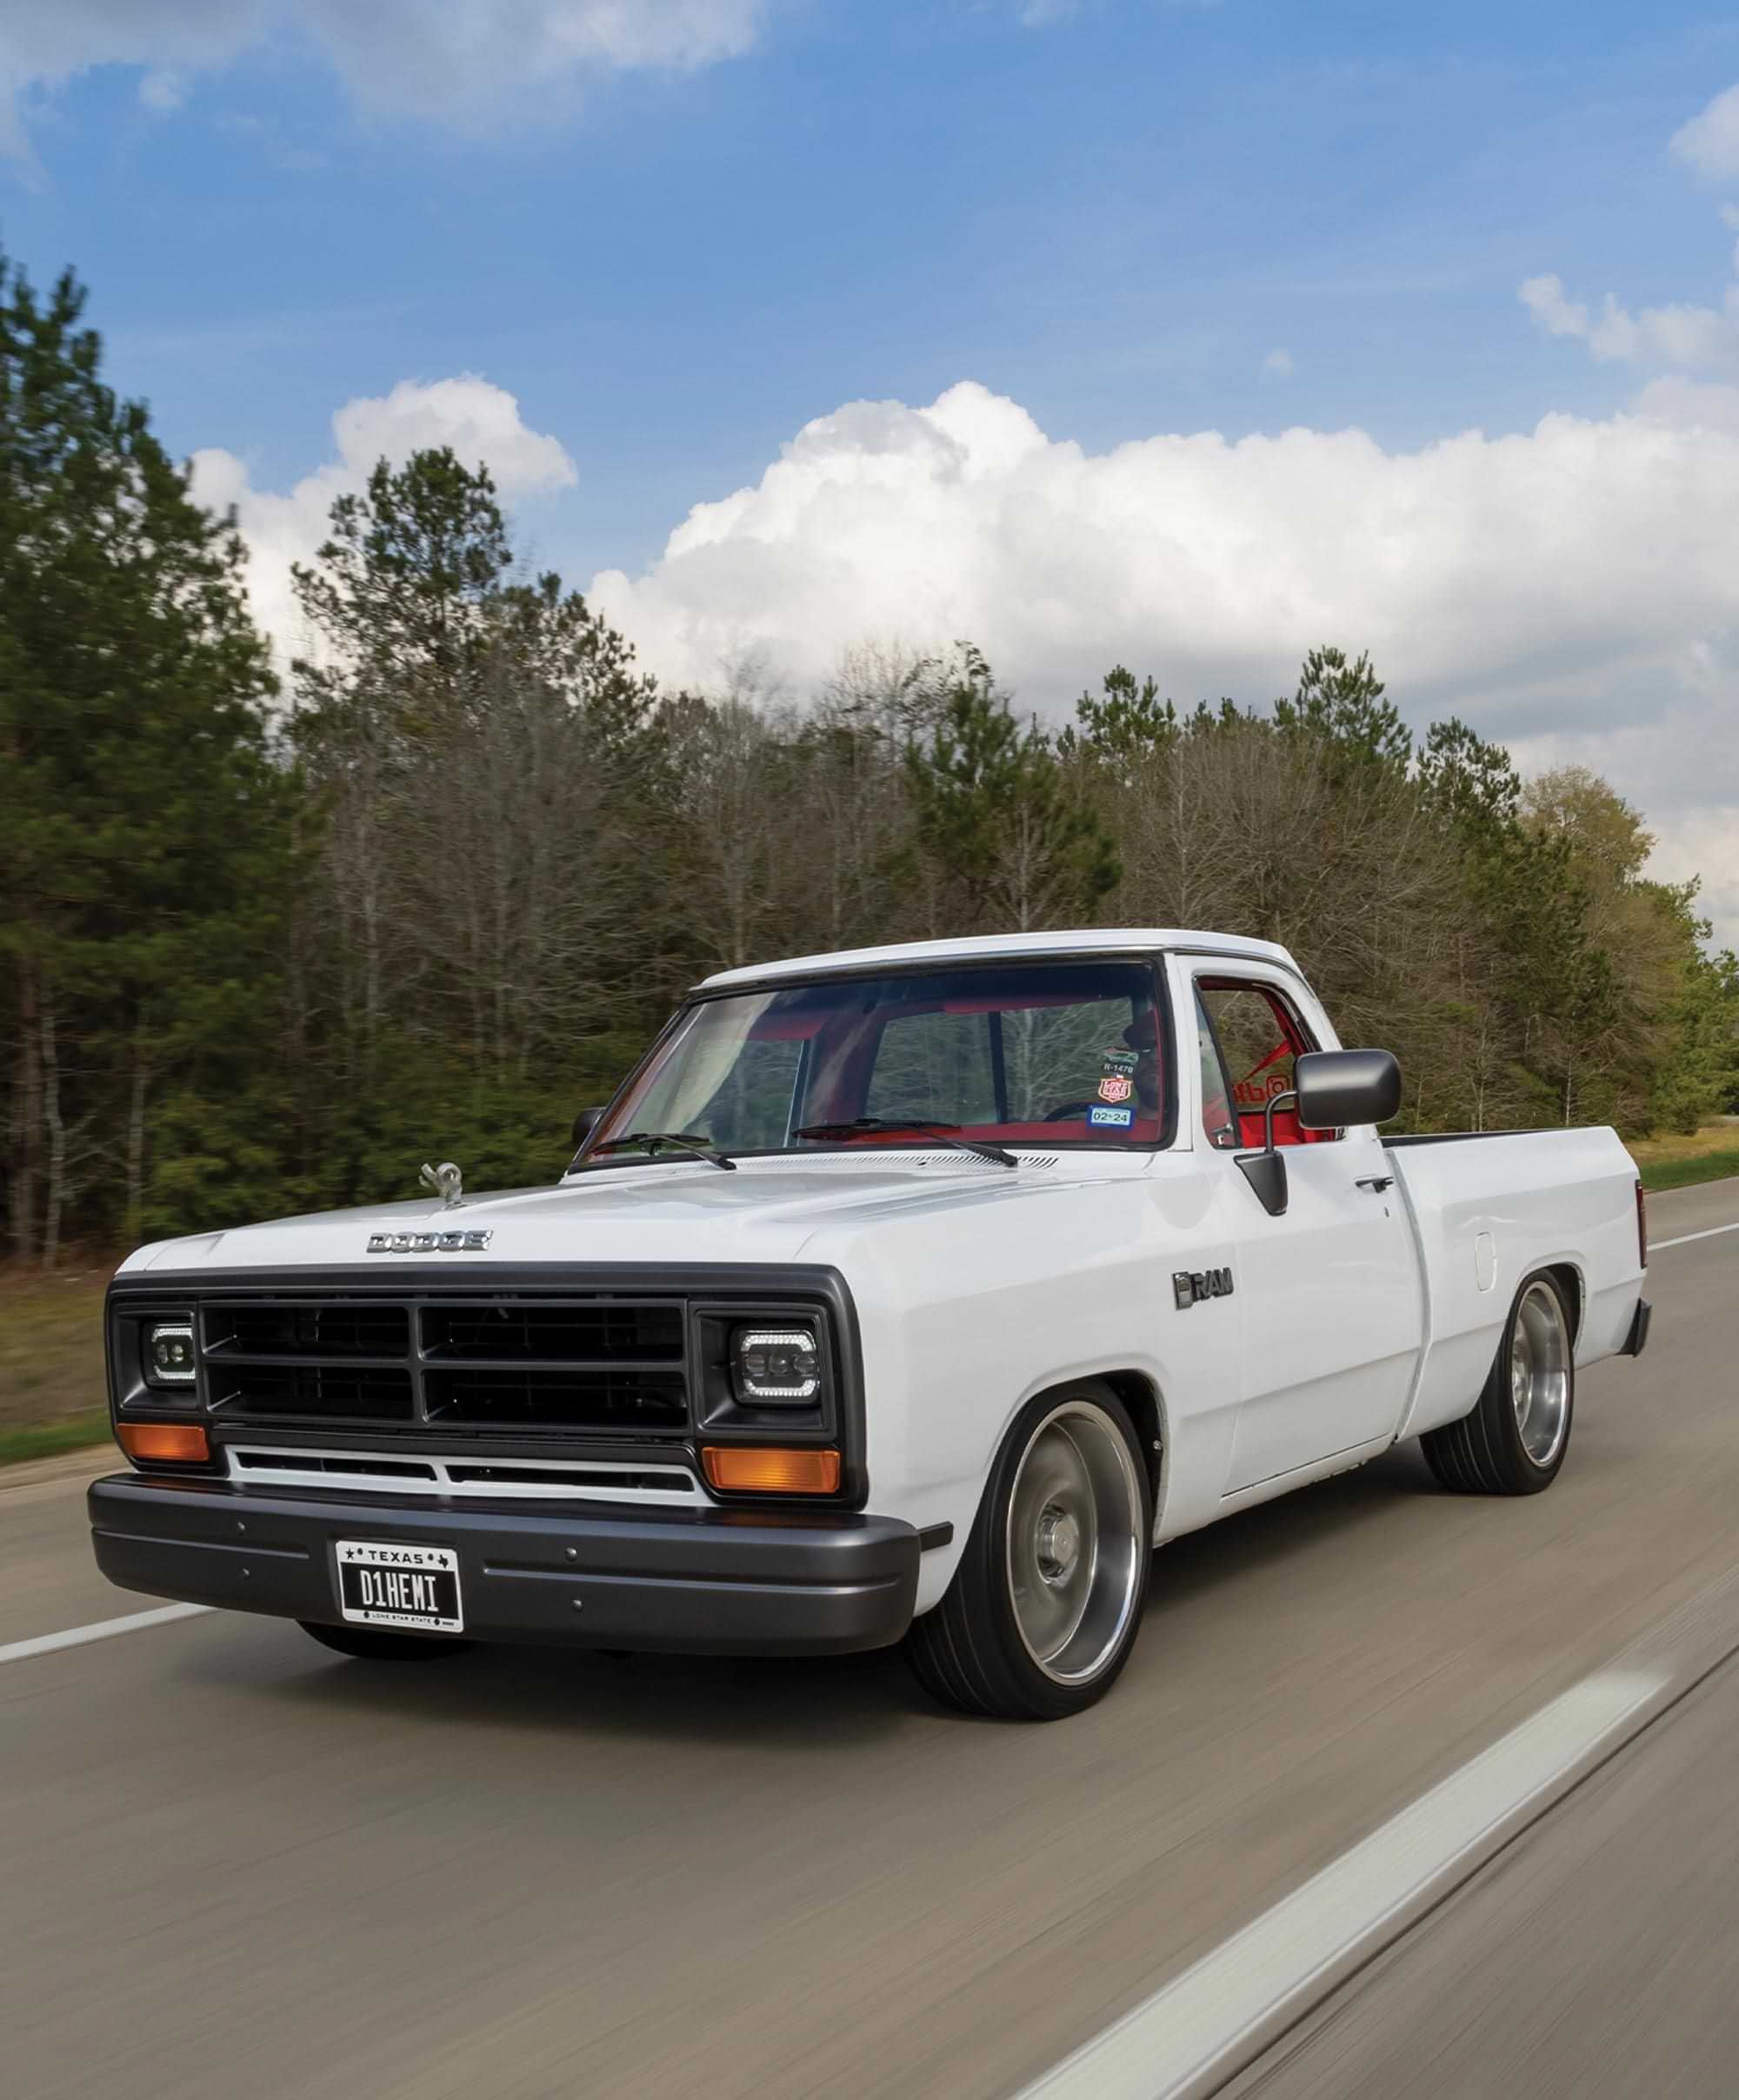 3/4ths driver's side view of the ’89 Dodge Ram D150 riding down a highway